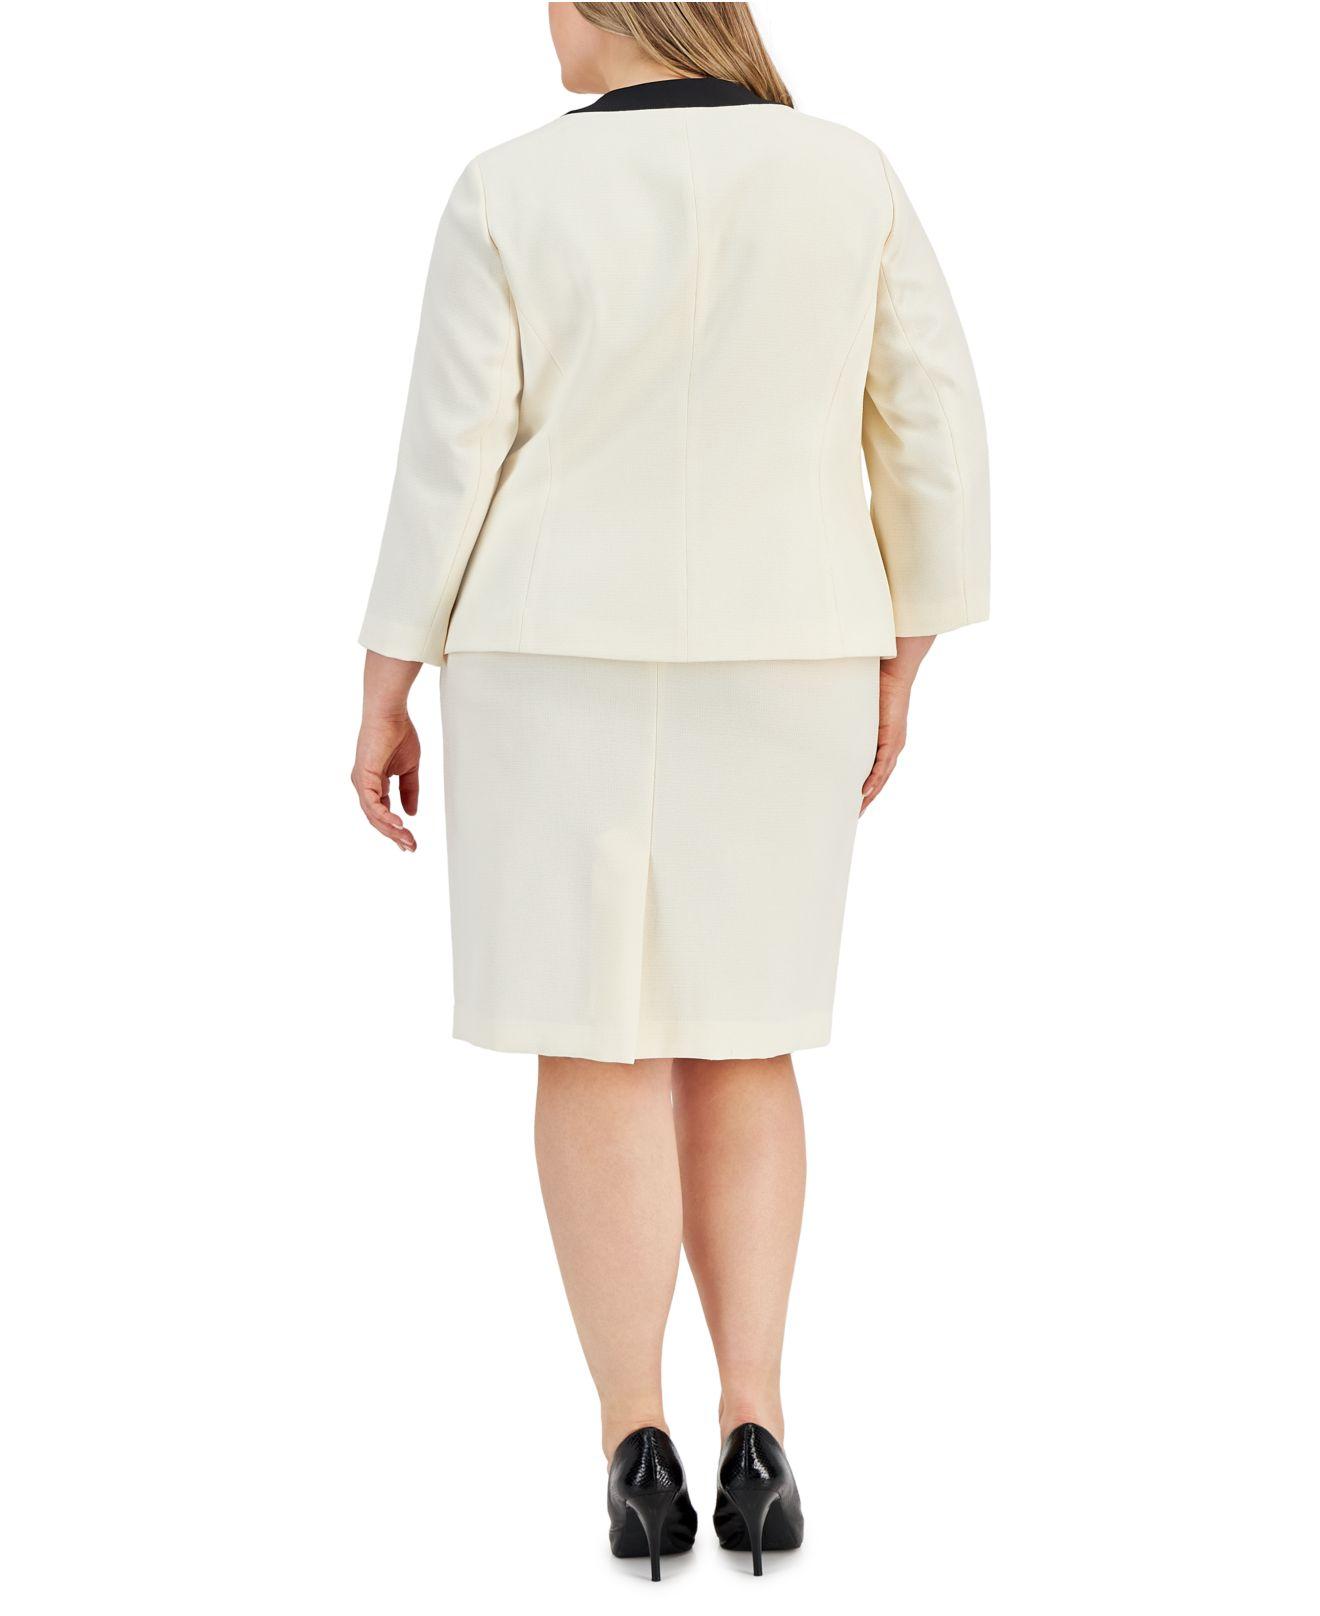 Le Suit Plus Size Tweed Framed Four-pocket Skirt Suit in White | Lyst